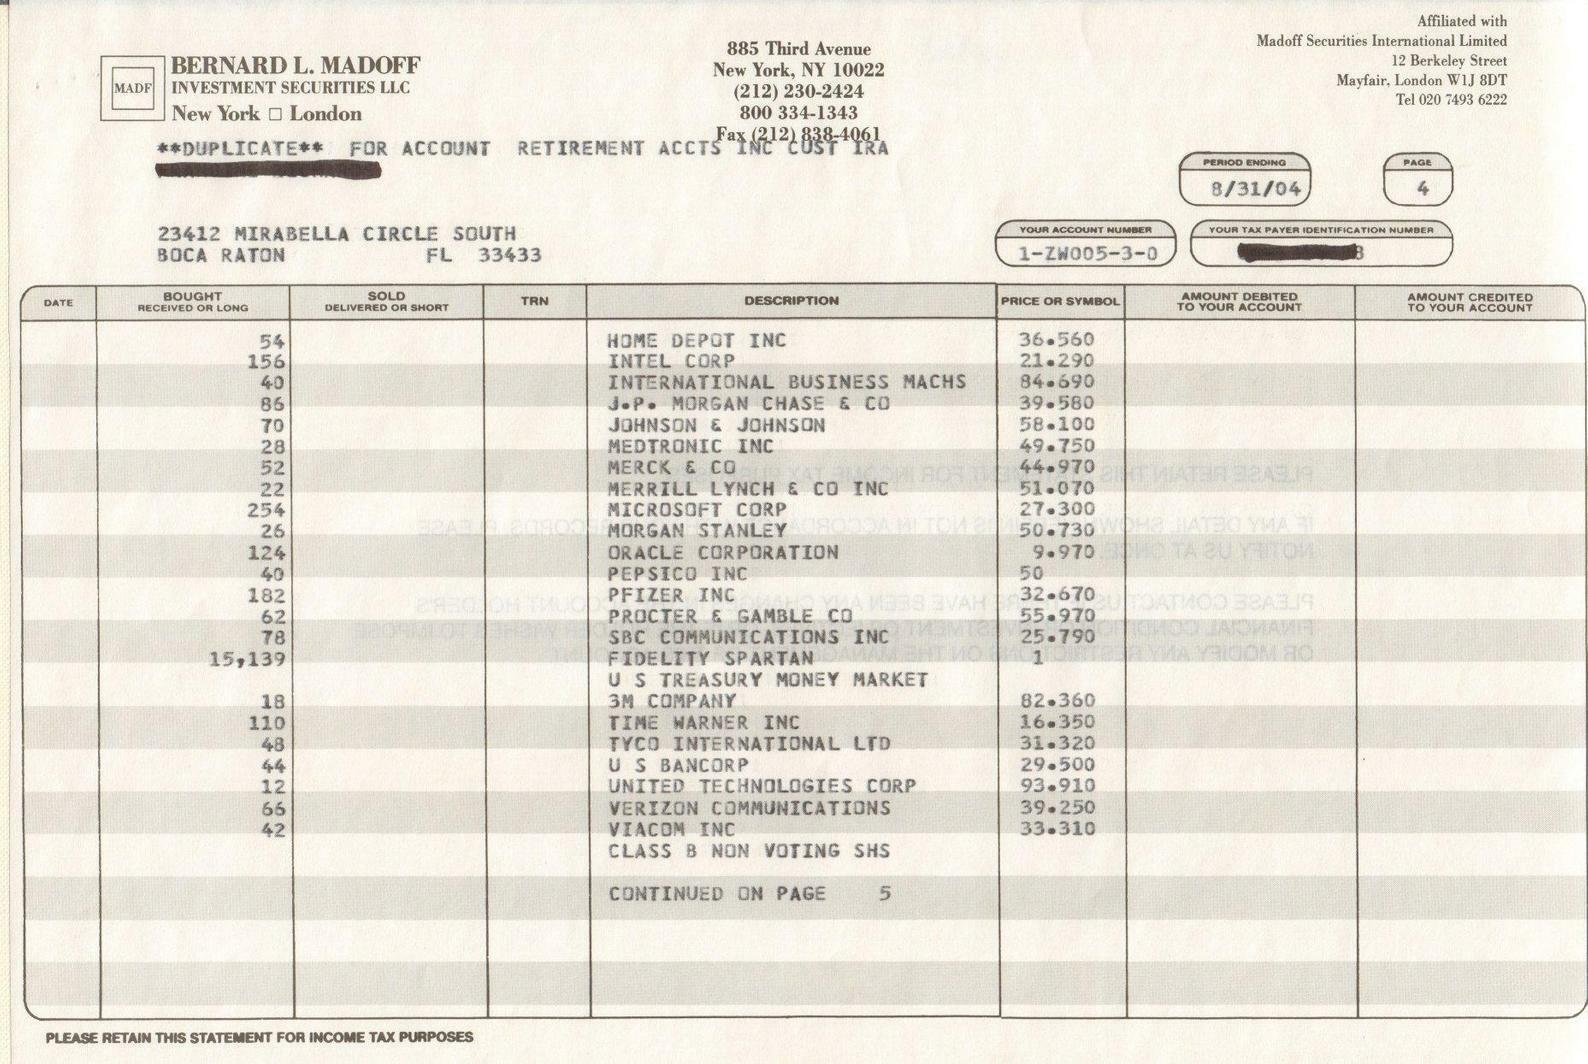 Bernard L Madoff Investment Securities LLC stock trading record and trade slip